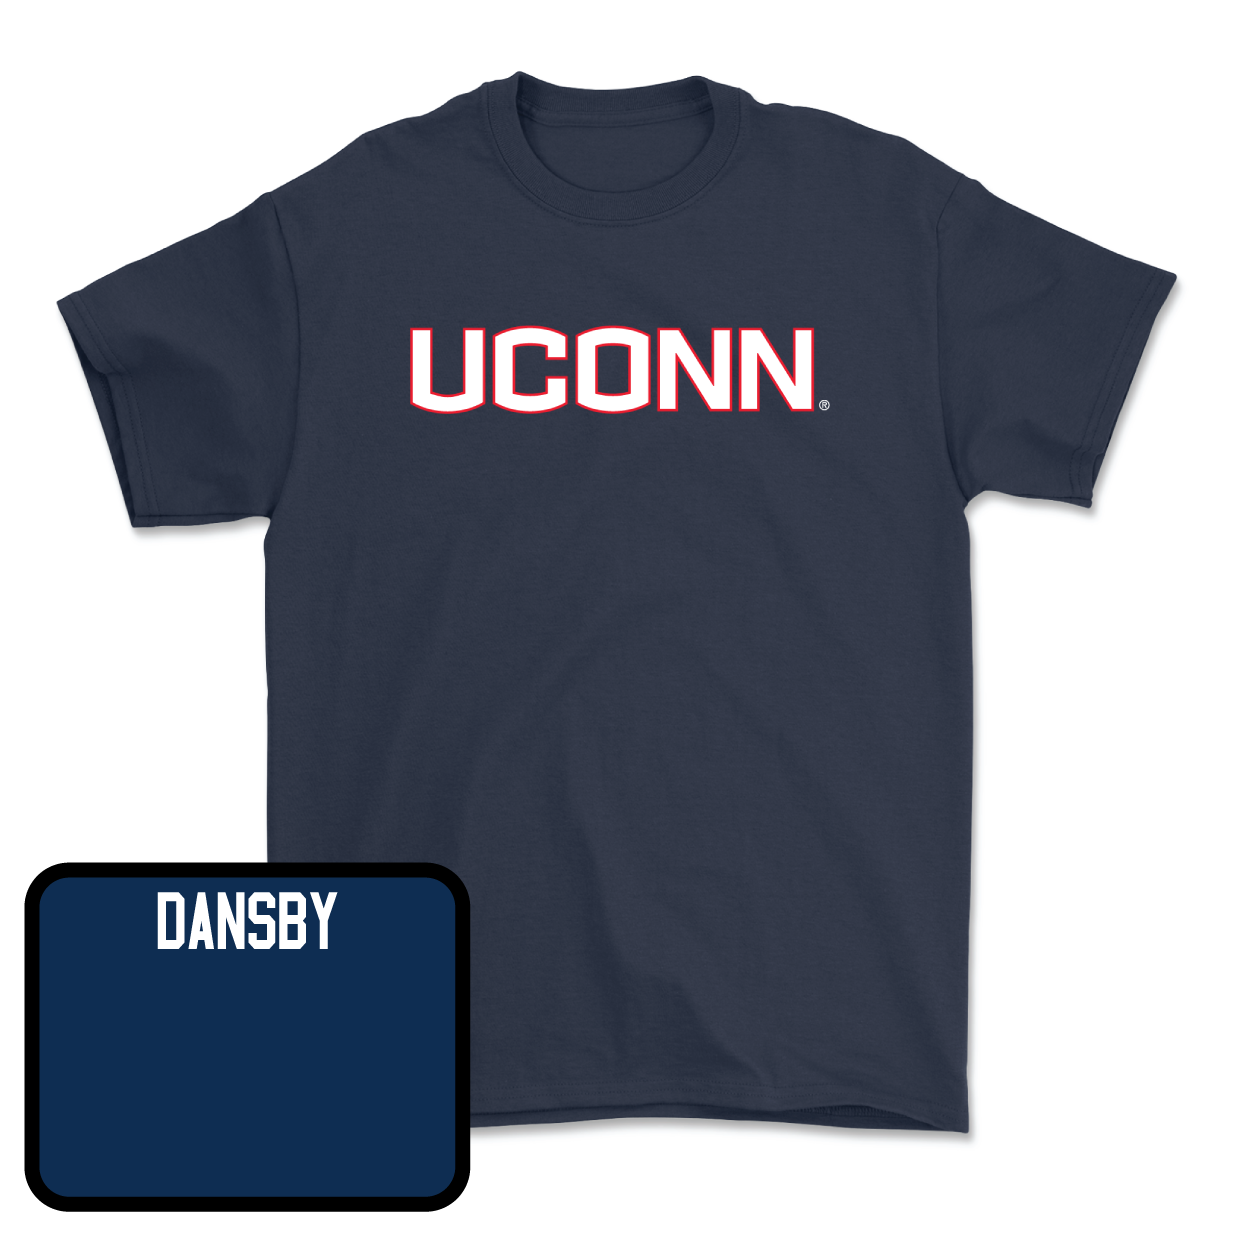 Navy Women's Track & Field UConn Tee 3X-Large / Mia Dansby